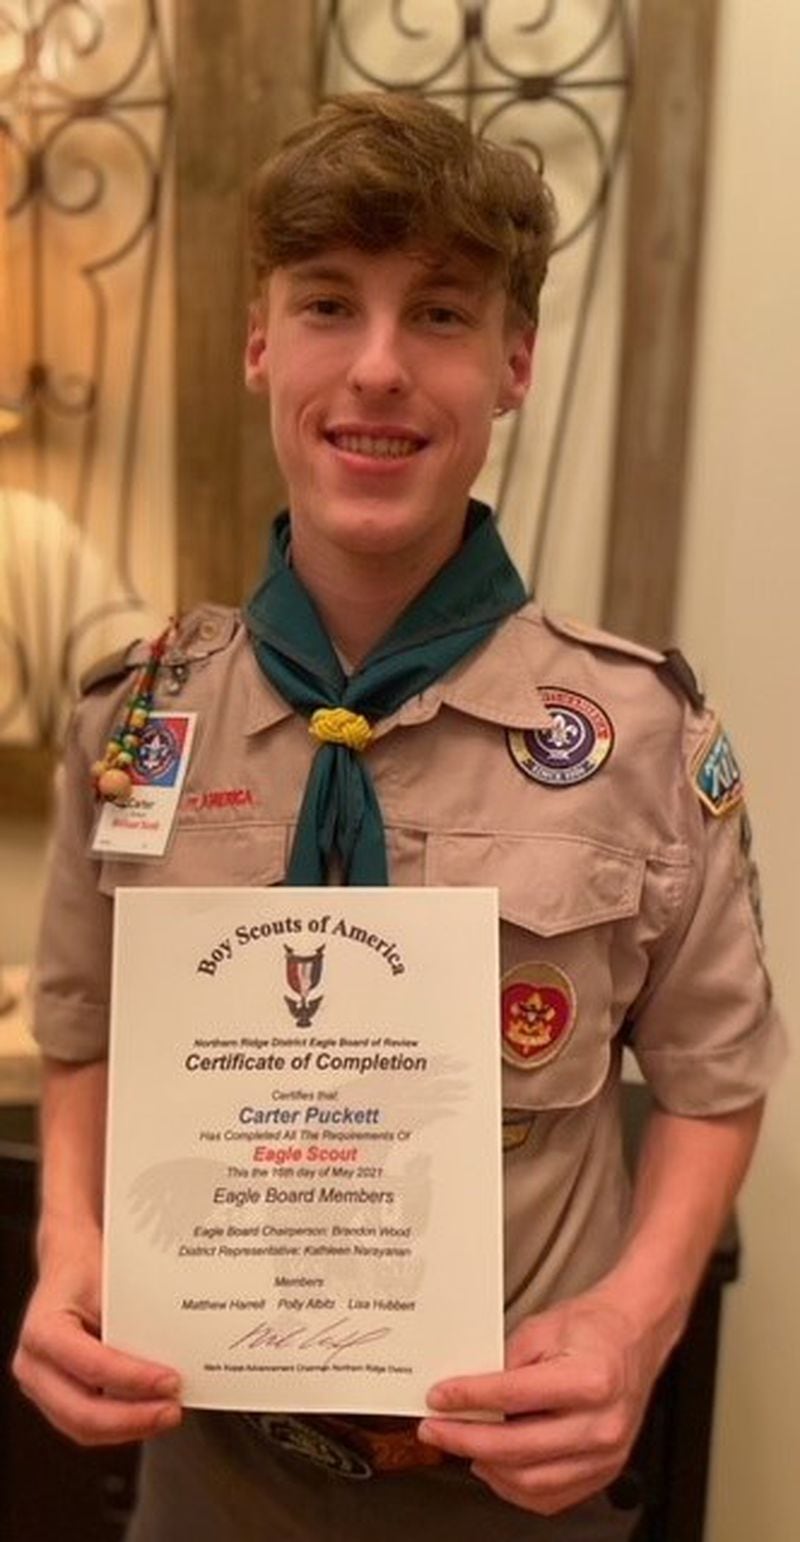 The Northern Ridge Boy Scout District (Cities of Roswell, Alpharetta, John’s Creek, Milton) is proud to announce its newest Eagle Scout,  who passed his Board of Review On May 16: Carter Puckett of Troop 430, sponsored by St. David’s Episcopal Church, whose project was the design and construction of a pathway connecting a driveway to an existing brick patio located behind Jeffords Hall at St. David’s Episcopal Church.  Carter also constructed a bench for this pathway